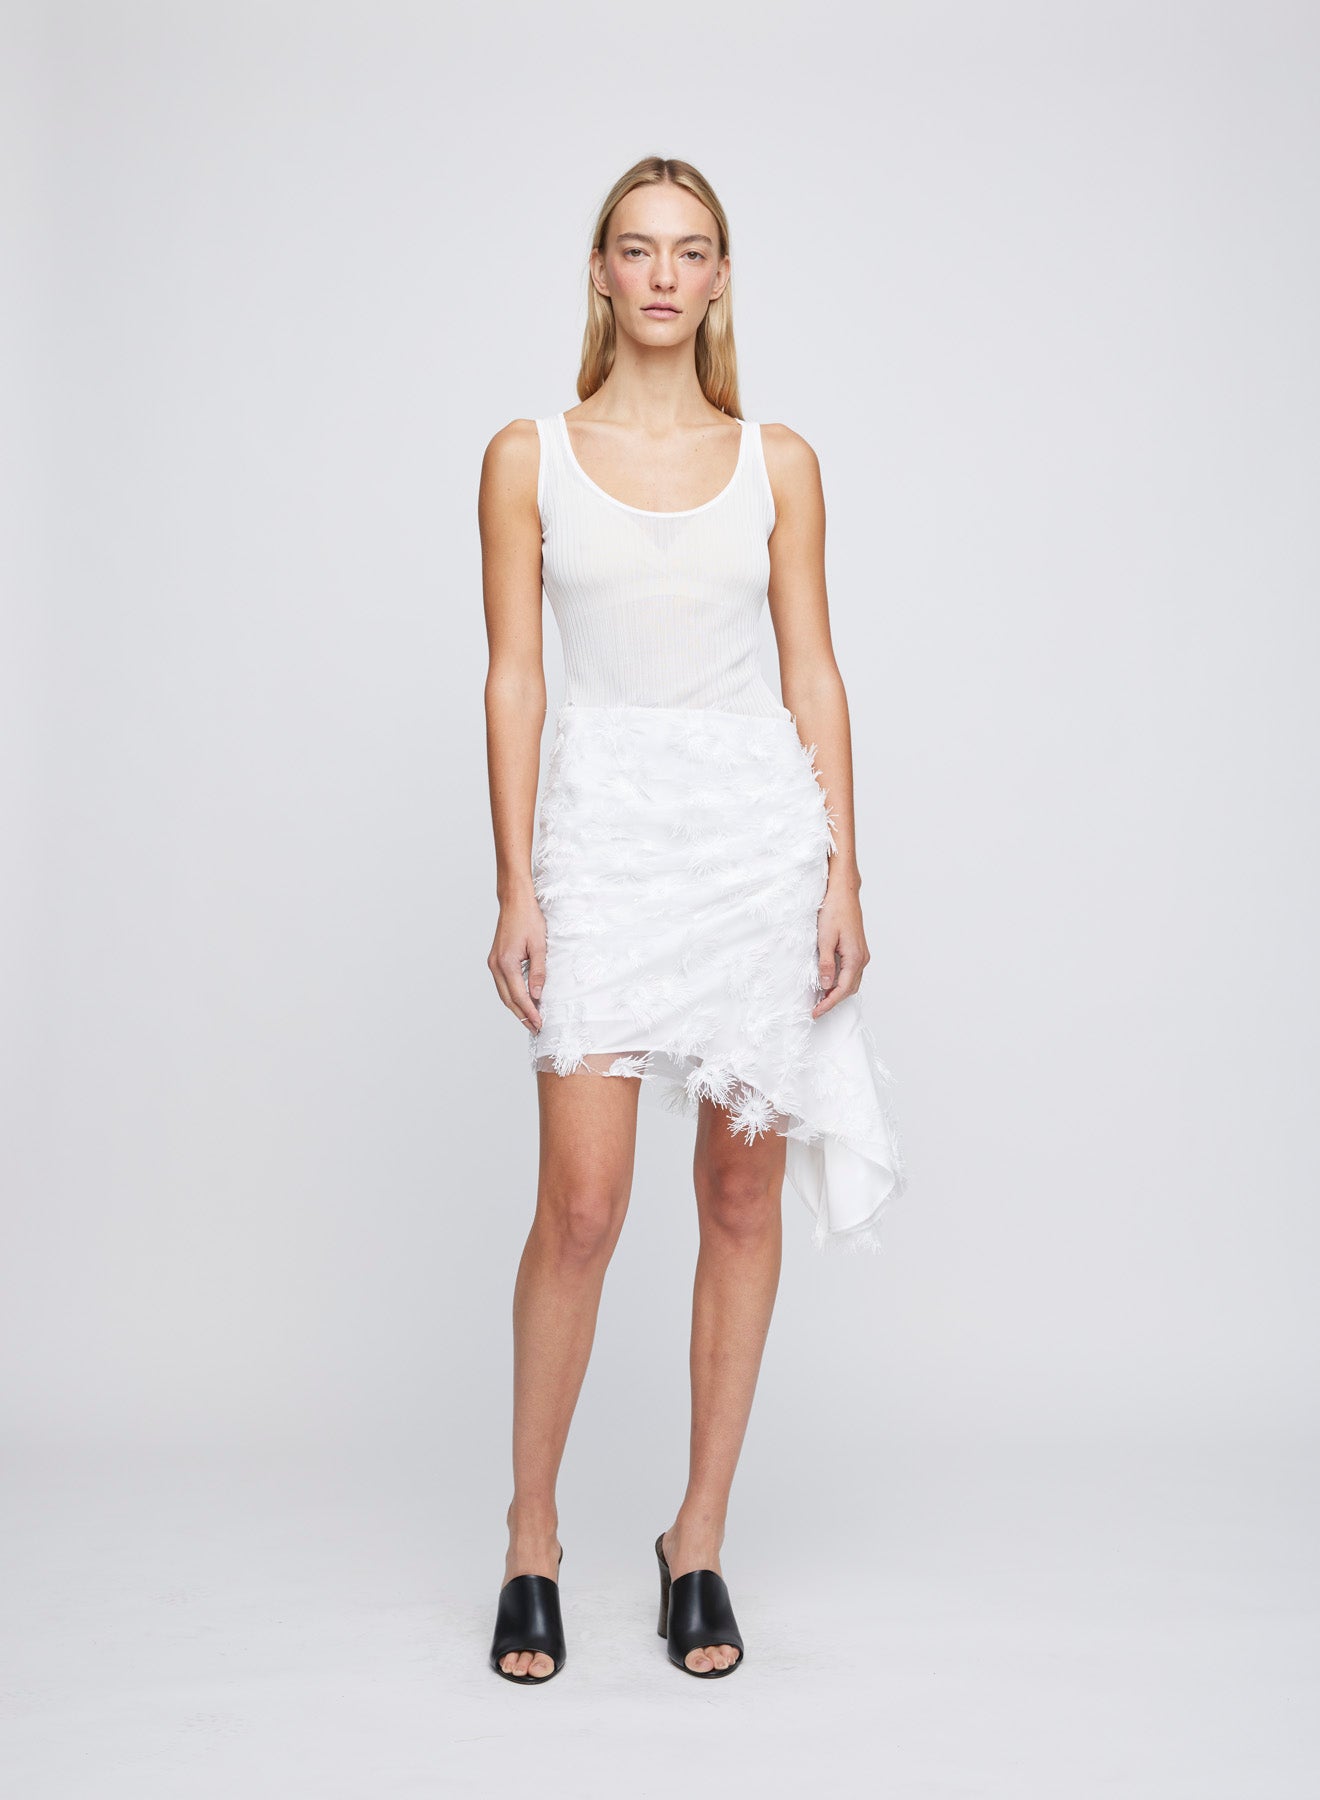 The ANNA QUAN Faye Skirt in Dandelion is an asymmetrical mini skirt crafted in our premium applique fabric